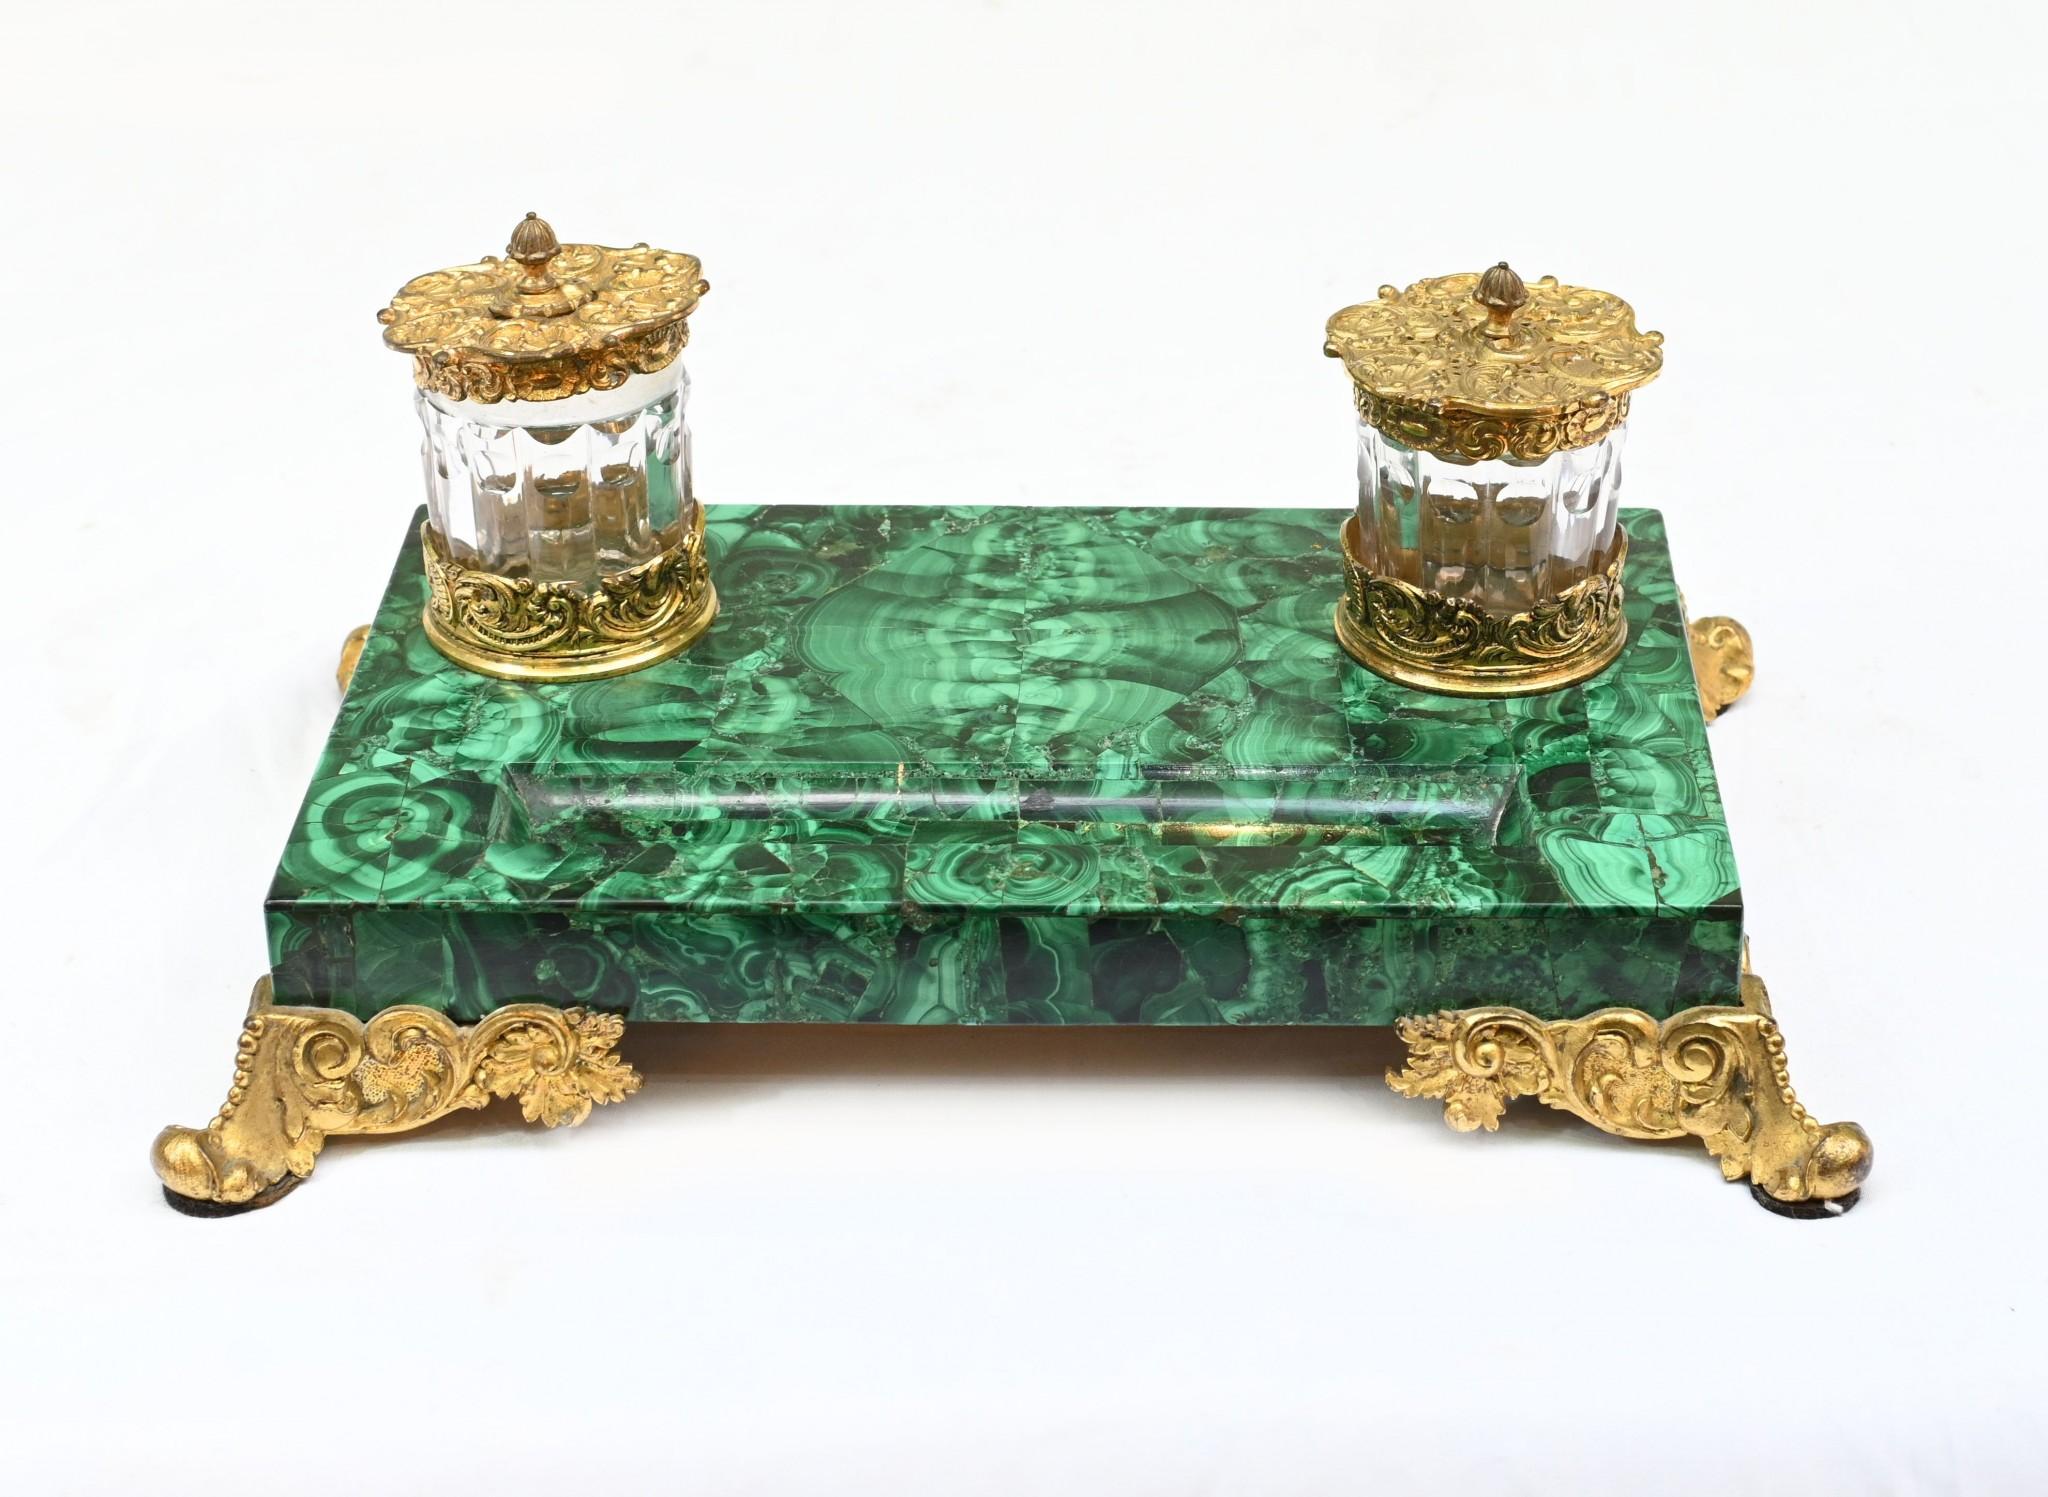 Gorgeous French malachite desk inkwell set
Love the colour and grain to the malachite which really stands out
The gilt fixtures are original and very well cast with great patina
Comes with the two glass ink pots
Circa 1880
We purchased this from a